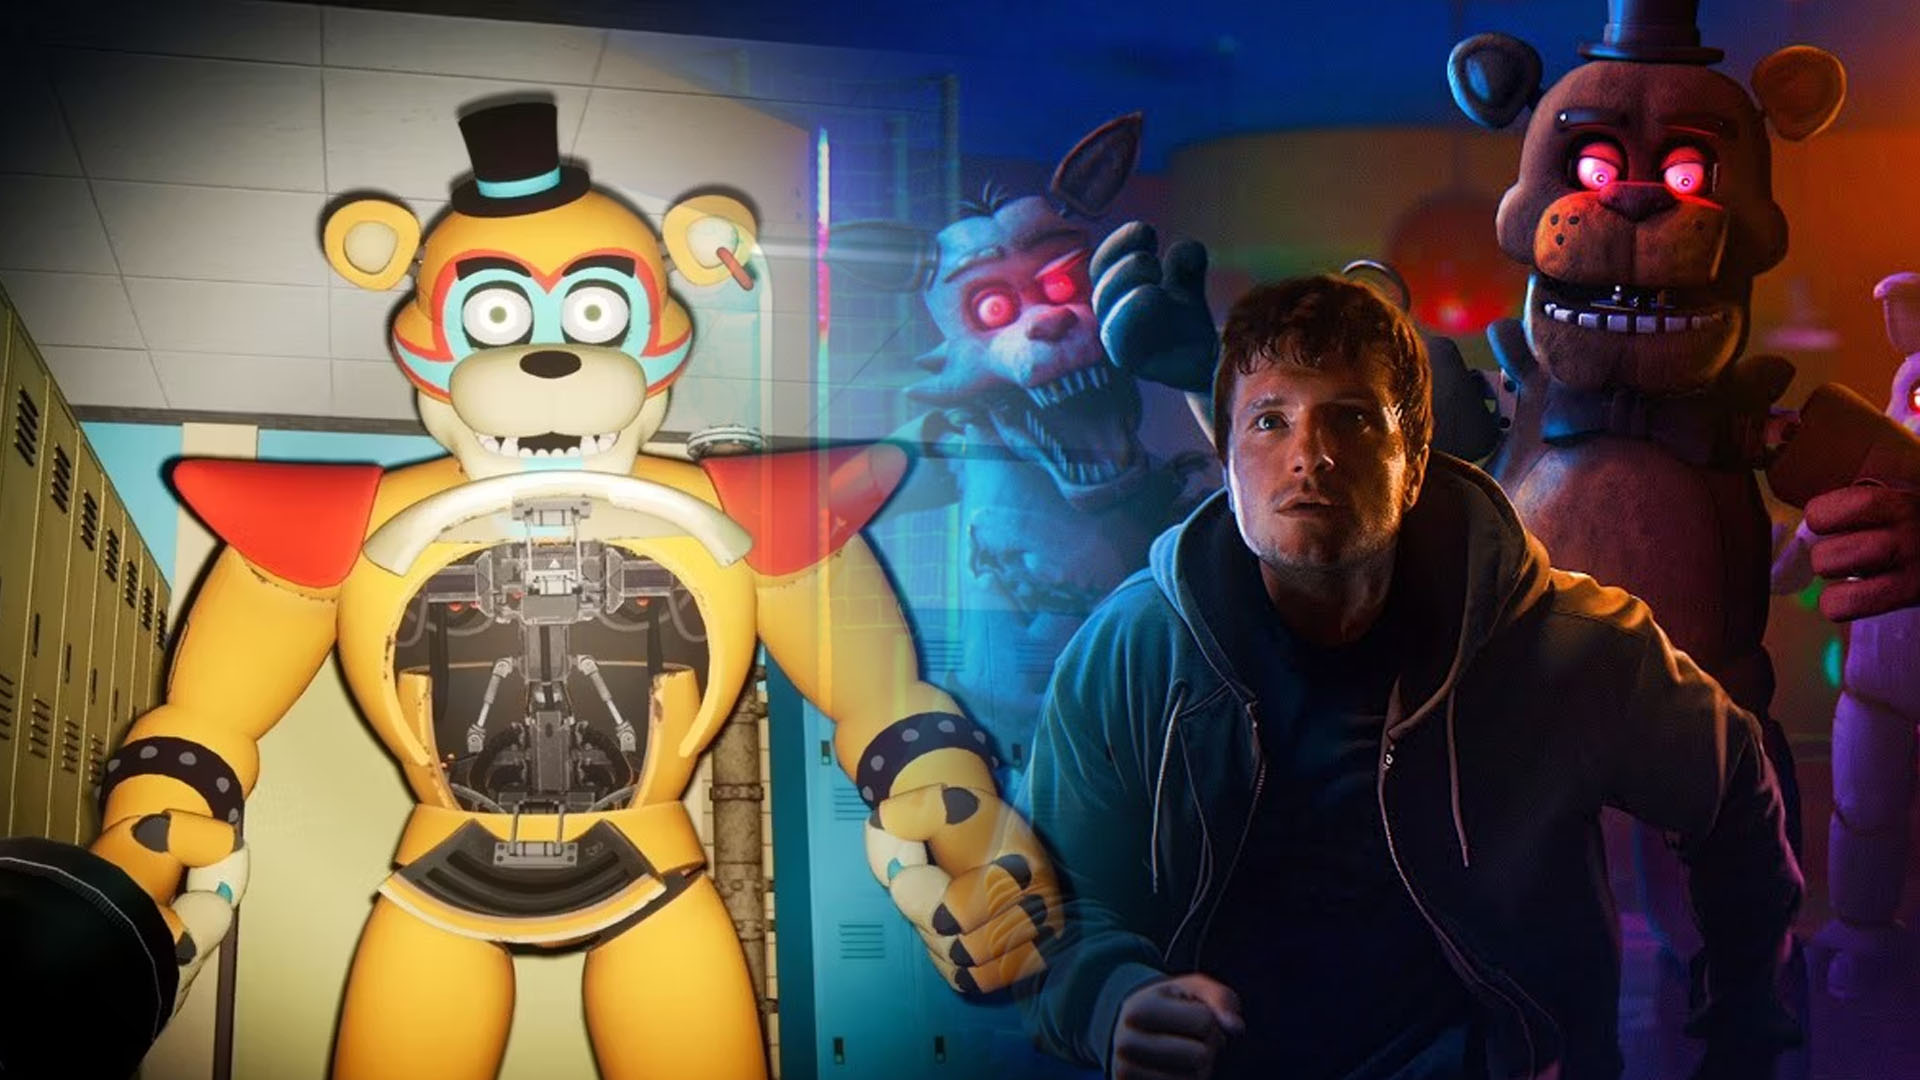 Freddy's Fridays (2023) - Movie Review  The Terrible yet VIOLENT Version  of FNAF 